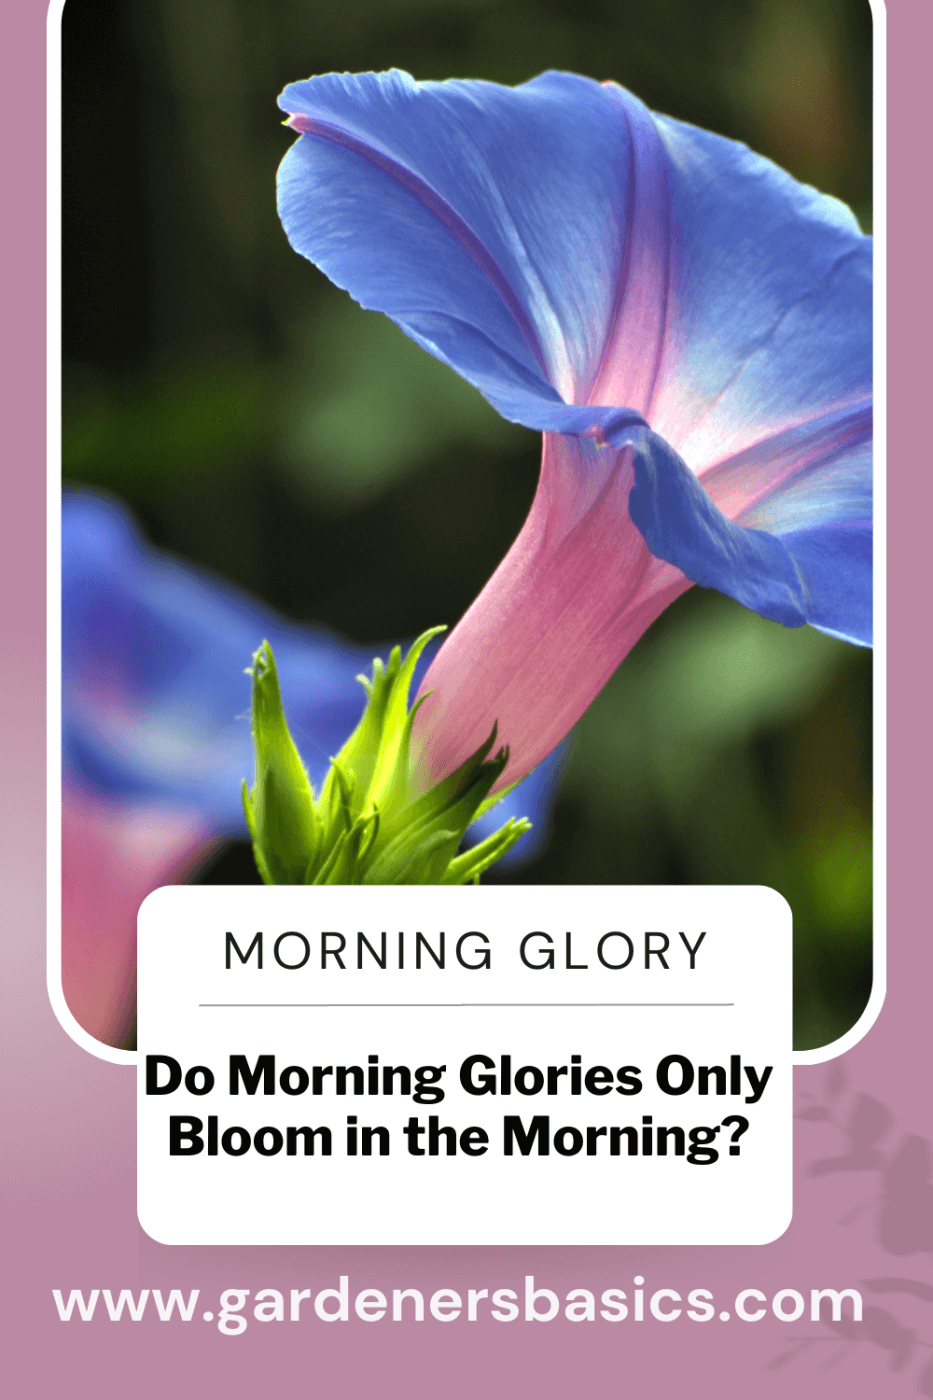 Do Morning Glories Only Bloom in the Morning?